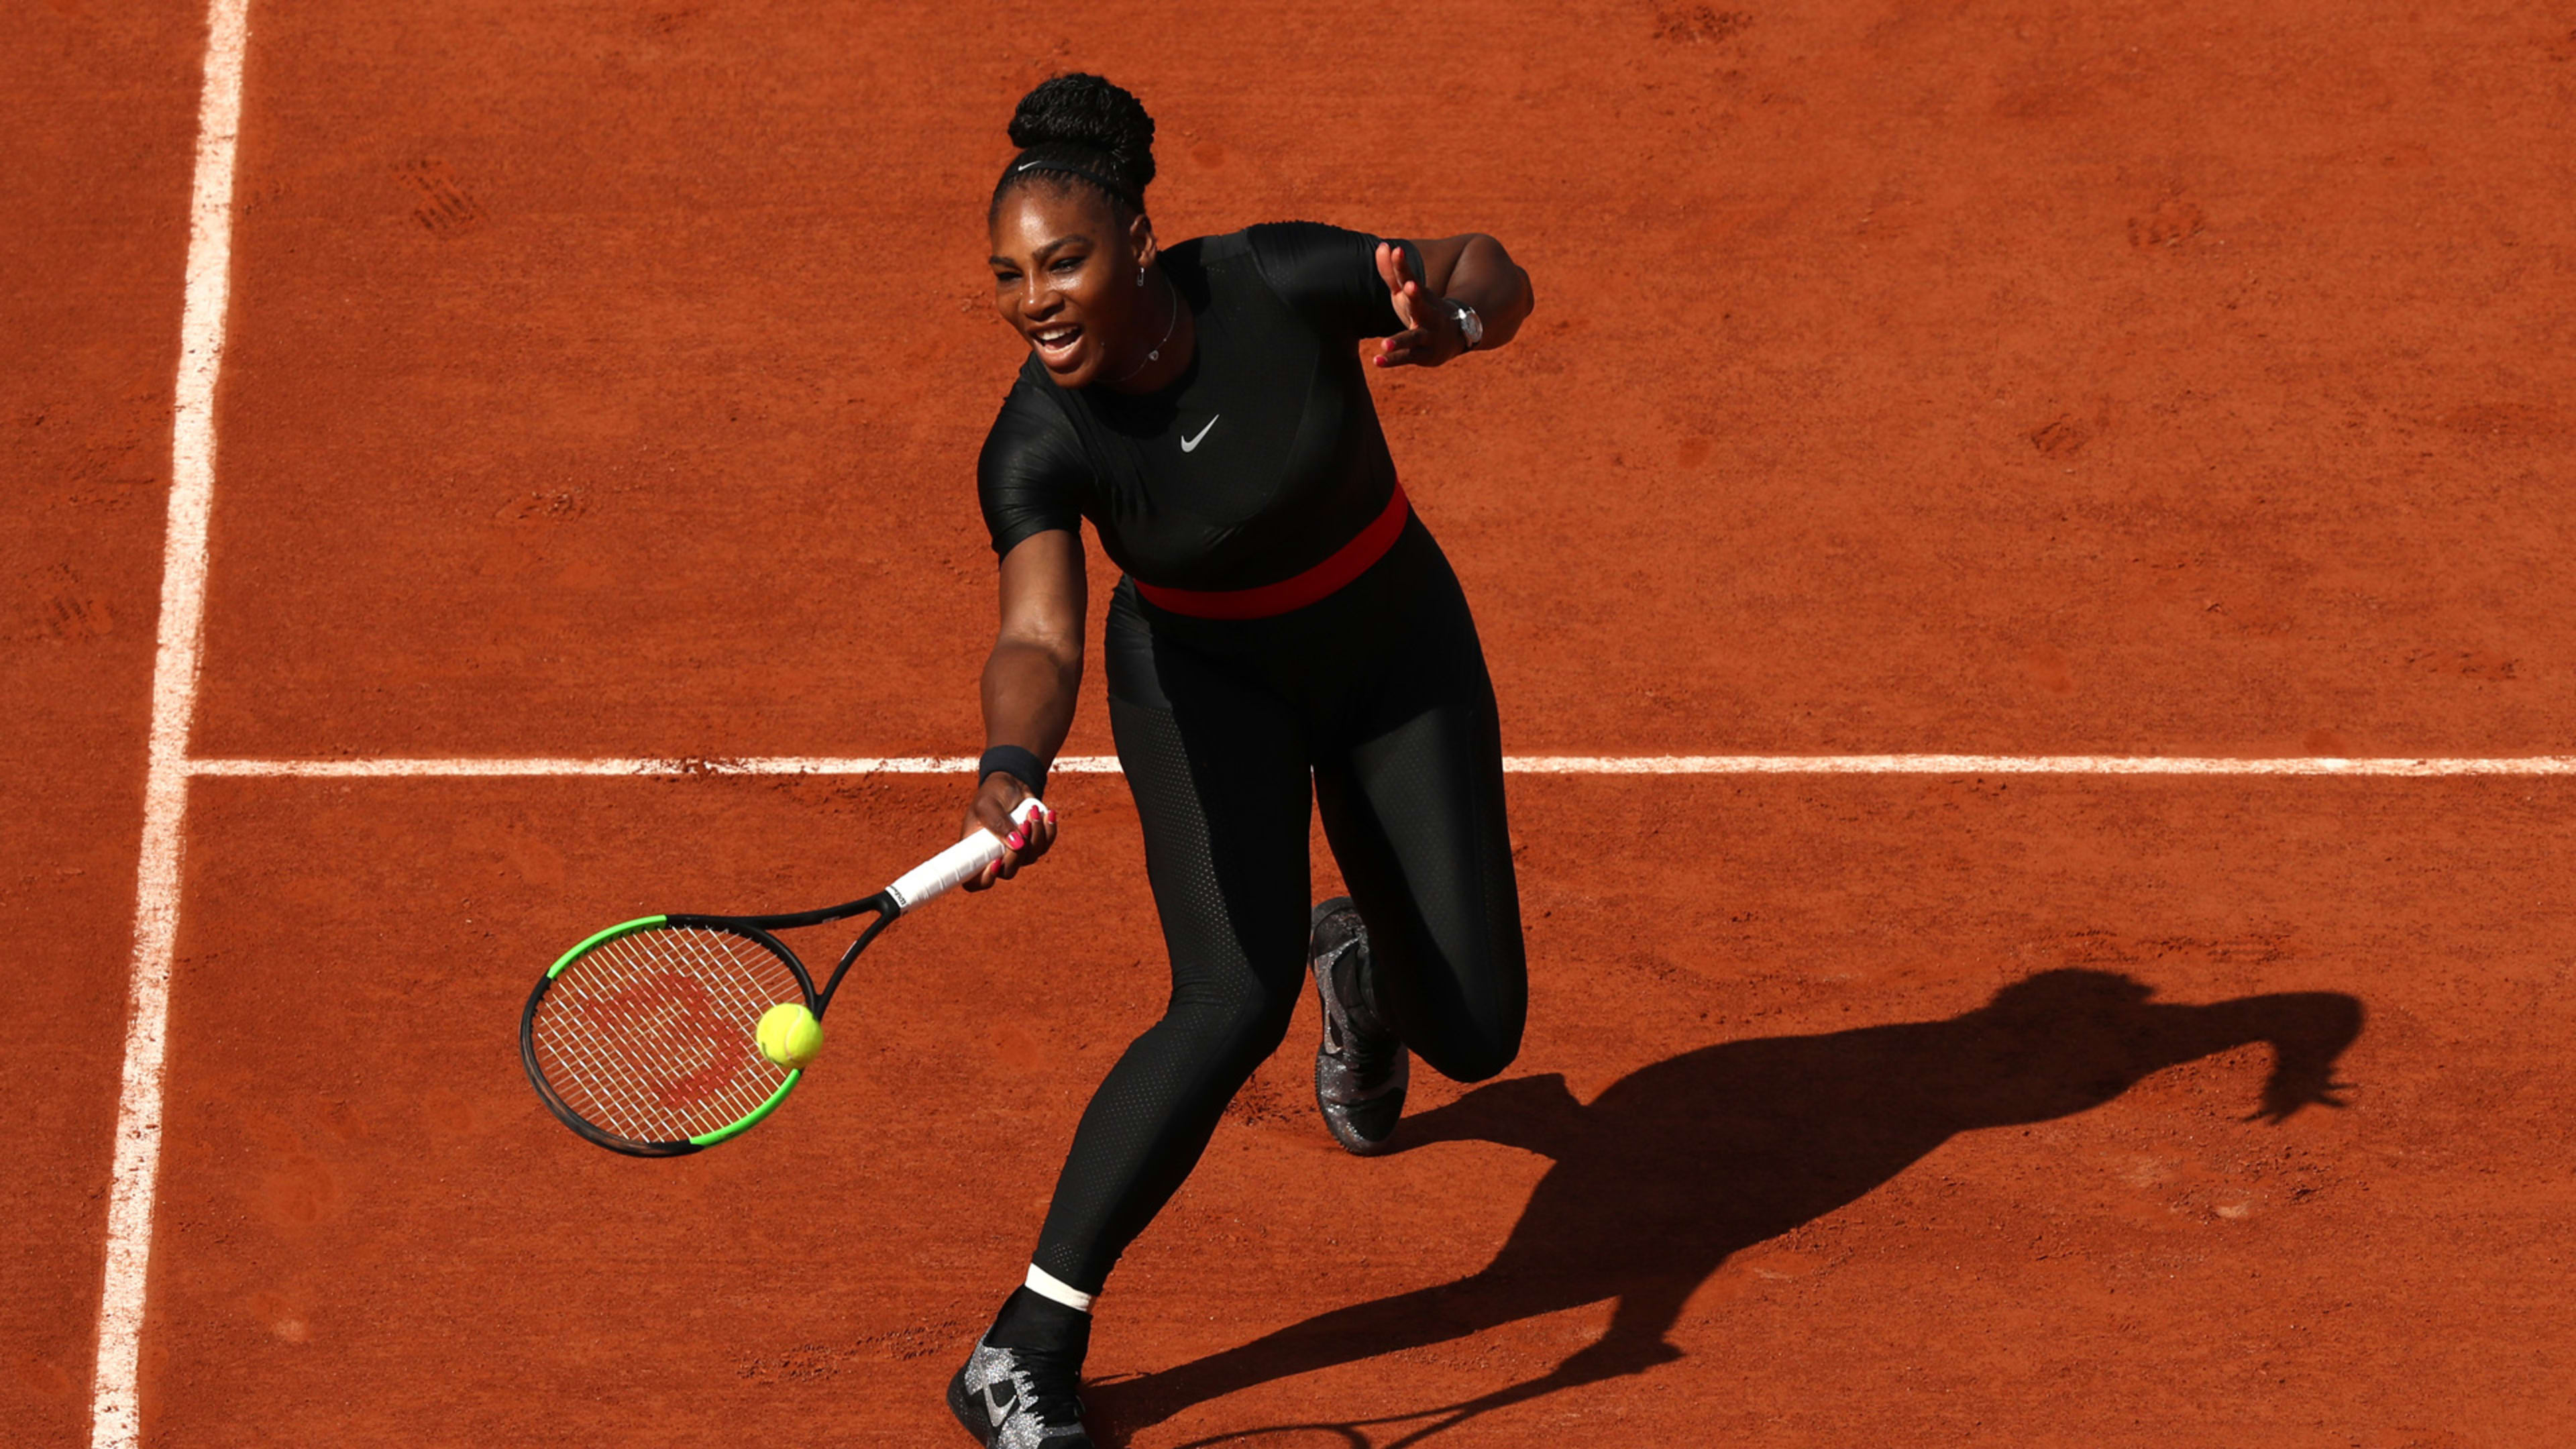 Serena Williams’s return to tennis sparks a maternity leave debate